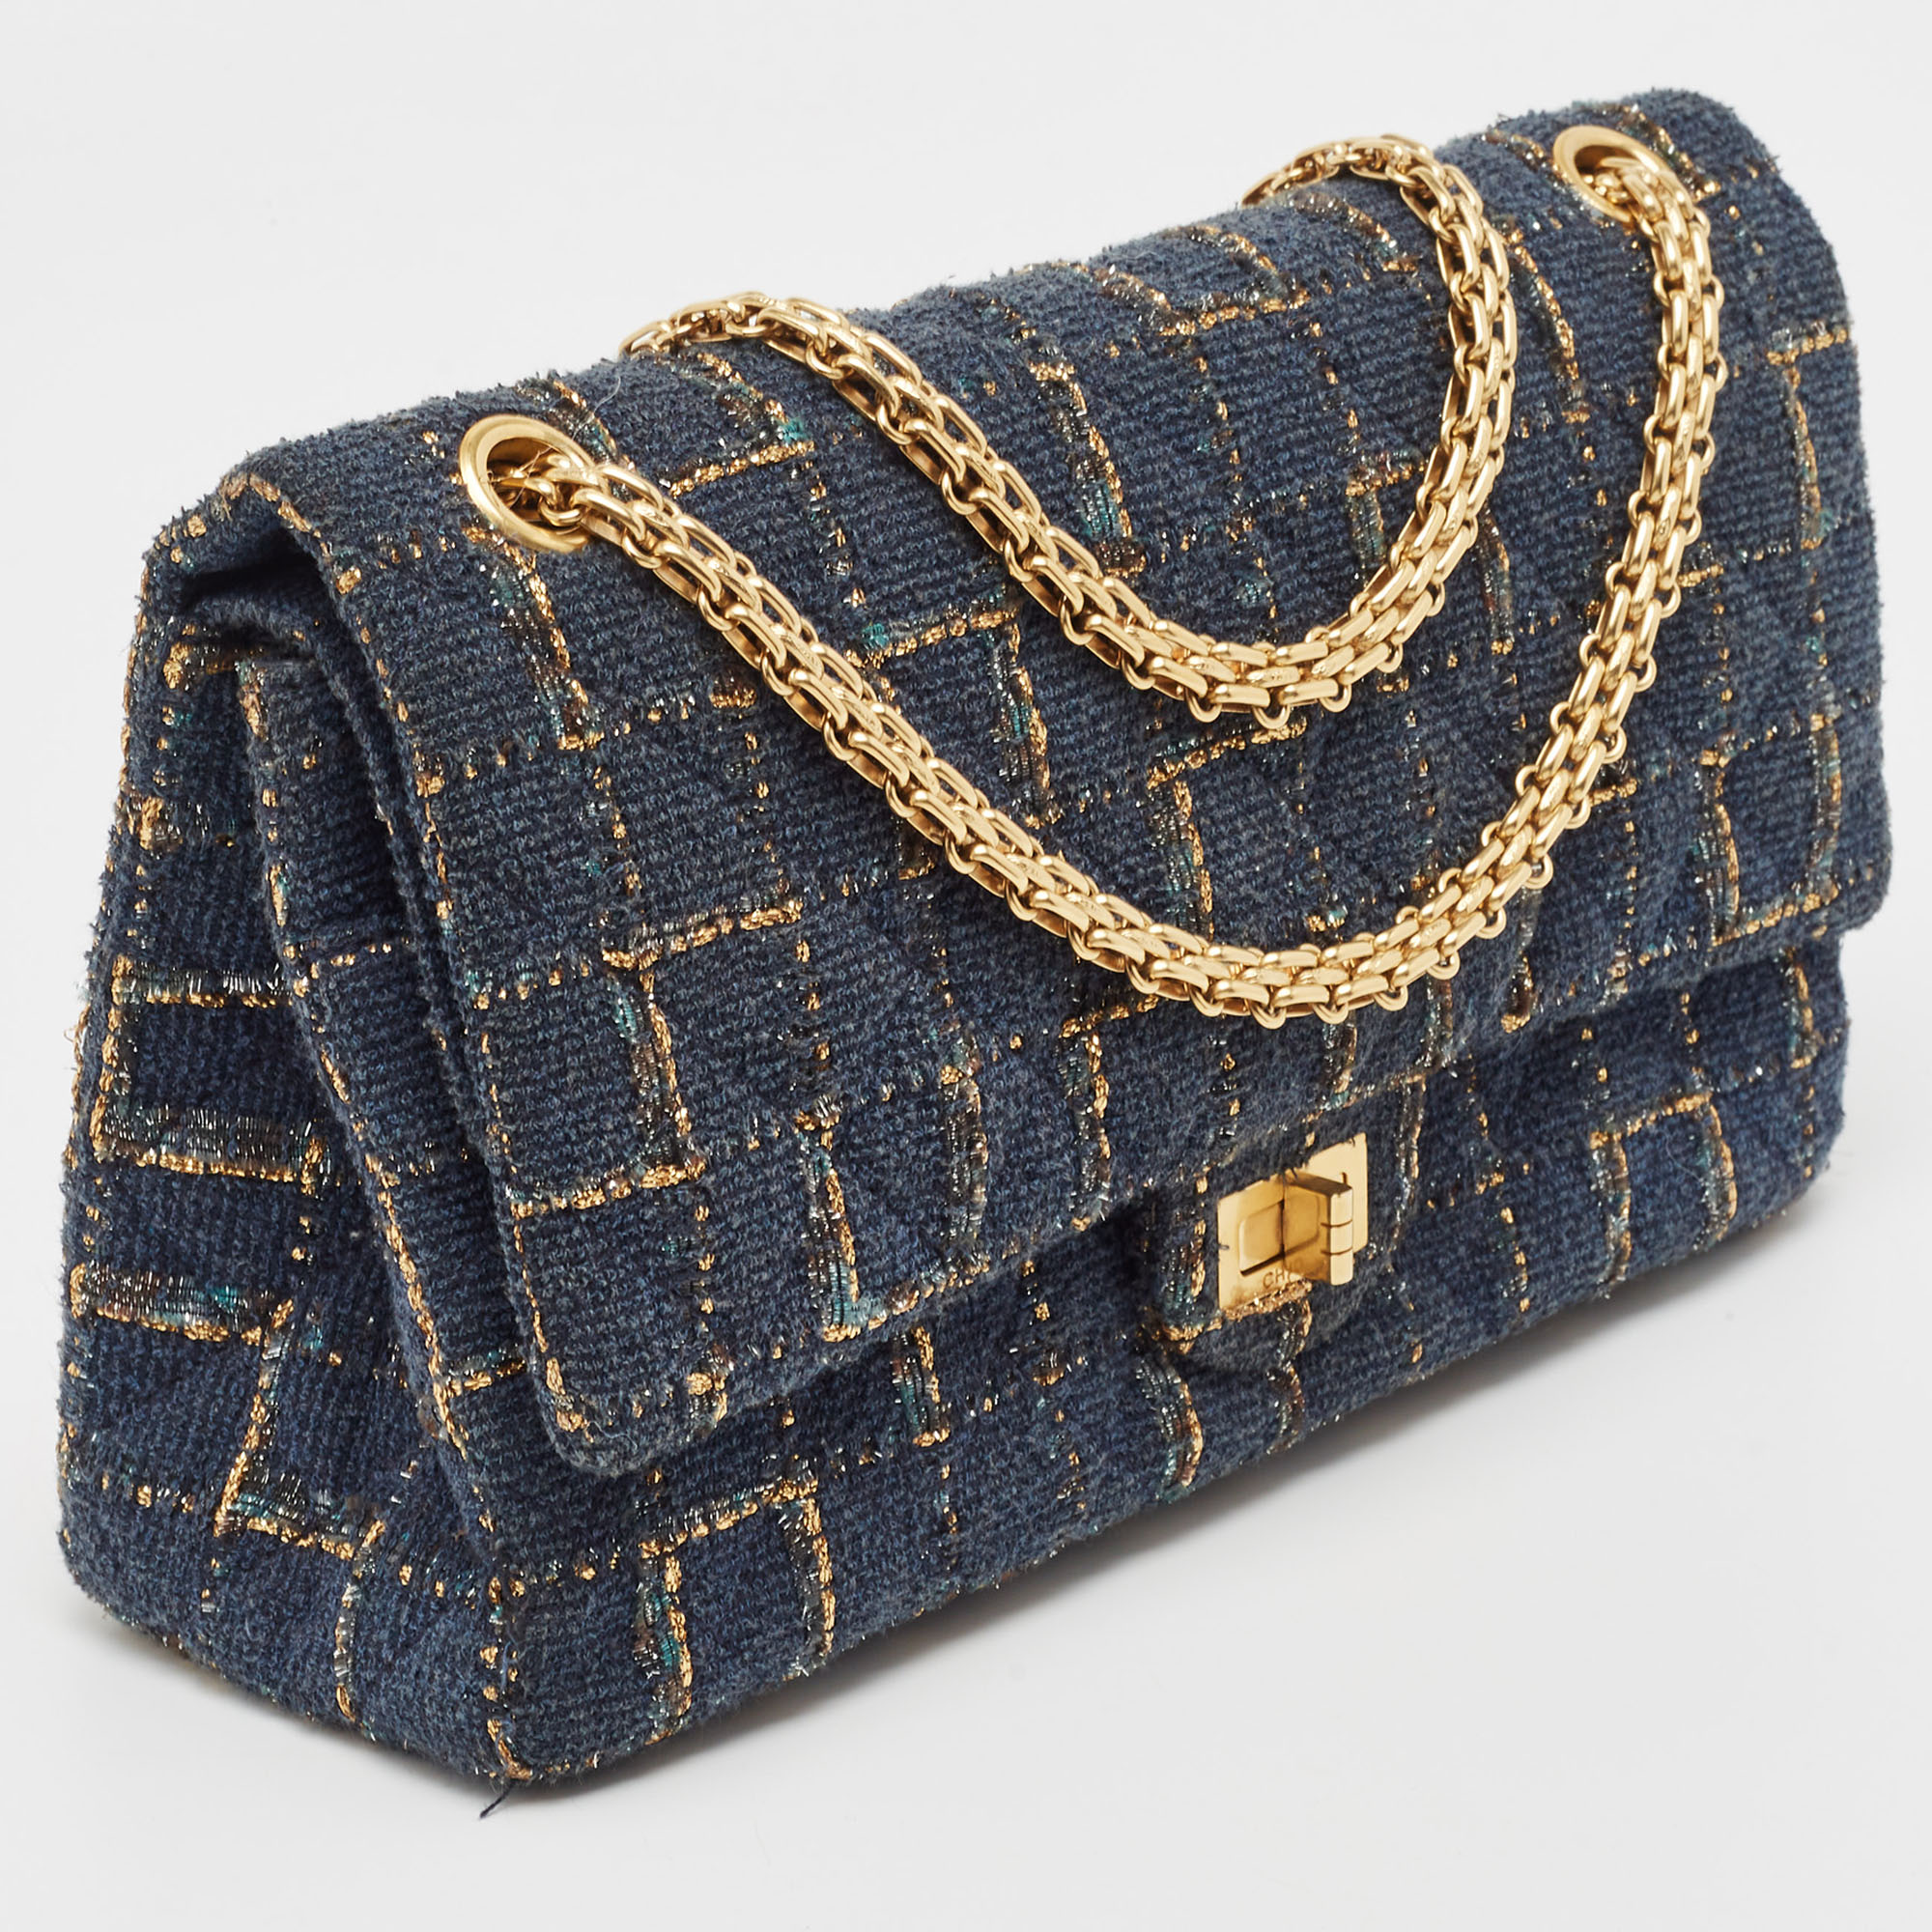 Chanel Blue/Gold Tweed Reissue 2.55 Icons Mademoiselle Double Flap Bag